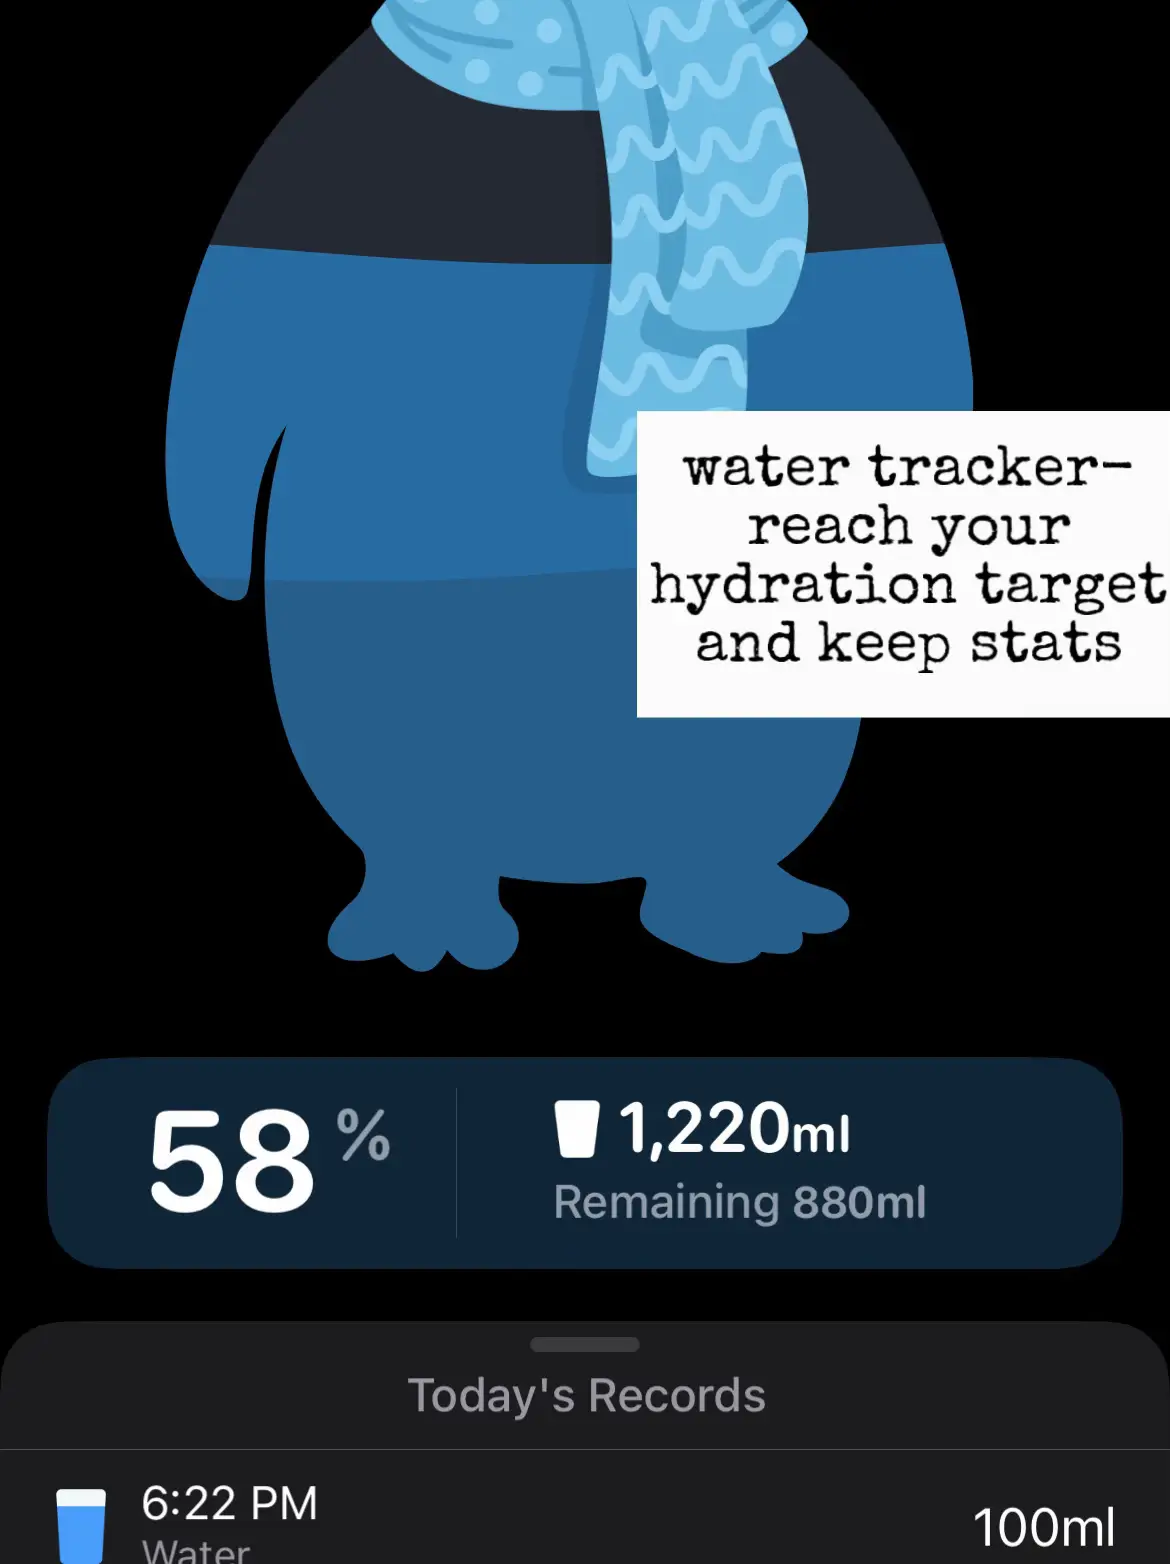  A cartoon image of a water bottle with the words "water tracker" on it.